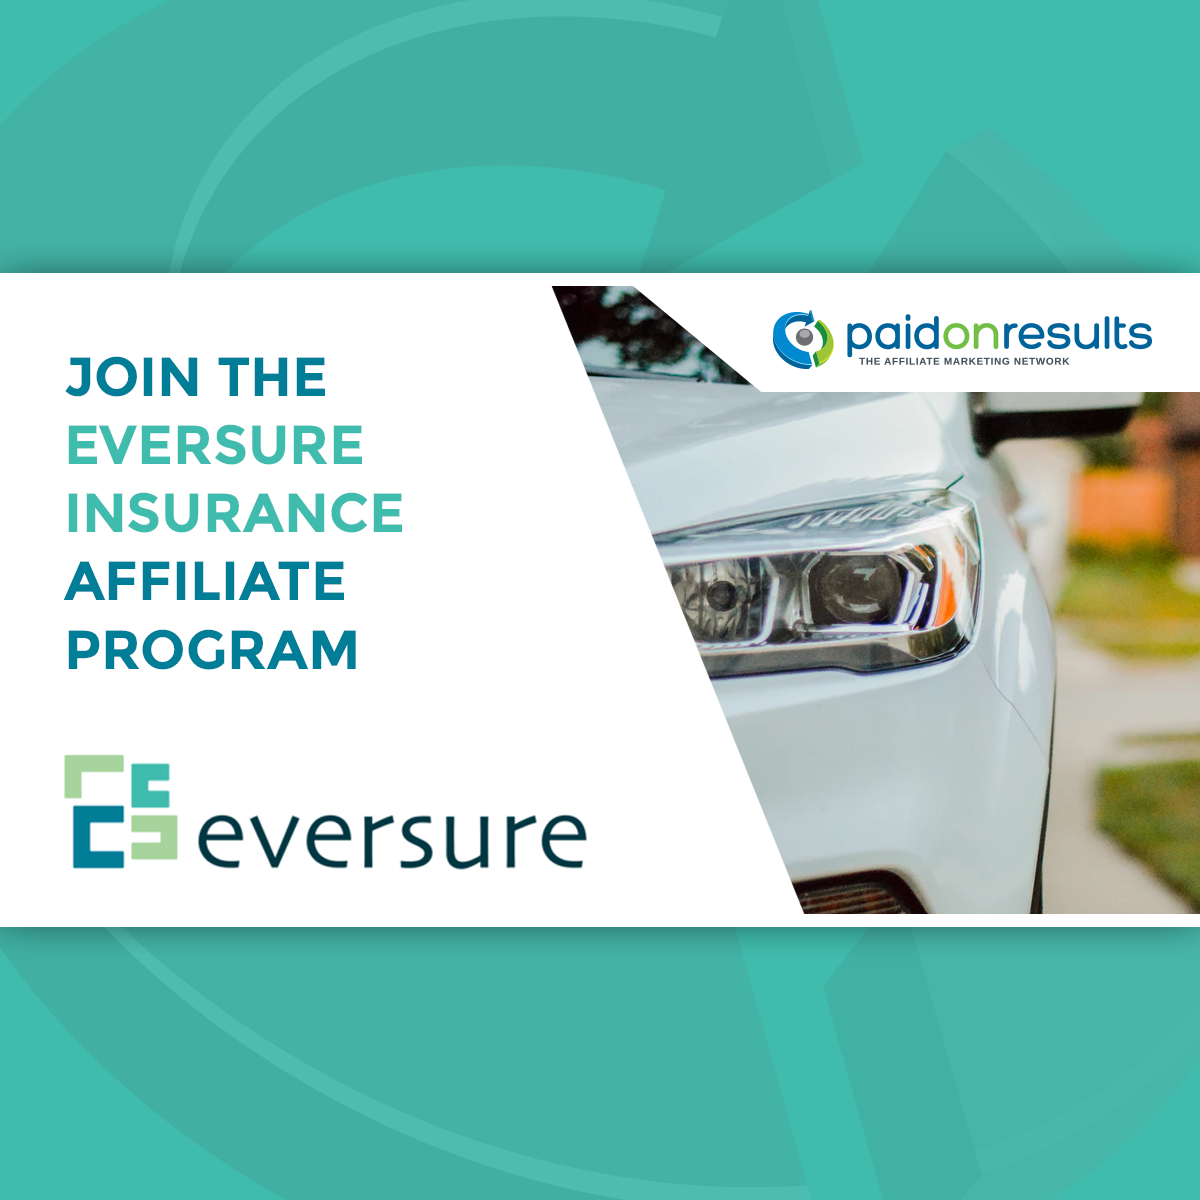 Eversure Insurance - Affiliate Marketing Program by Paid On Results